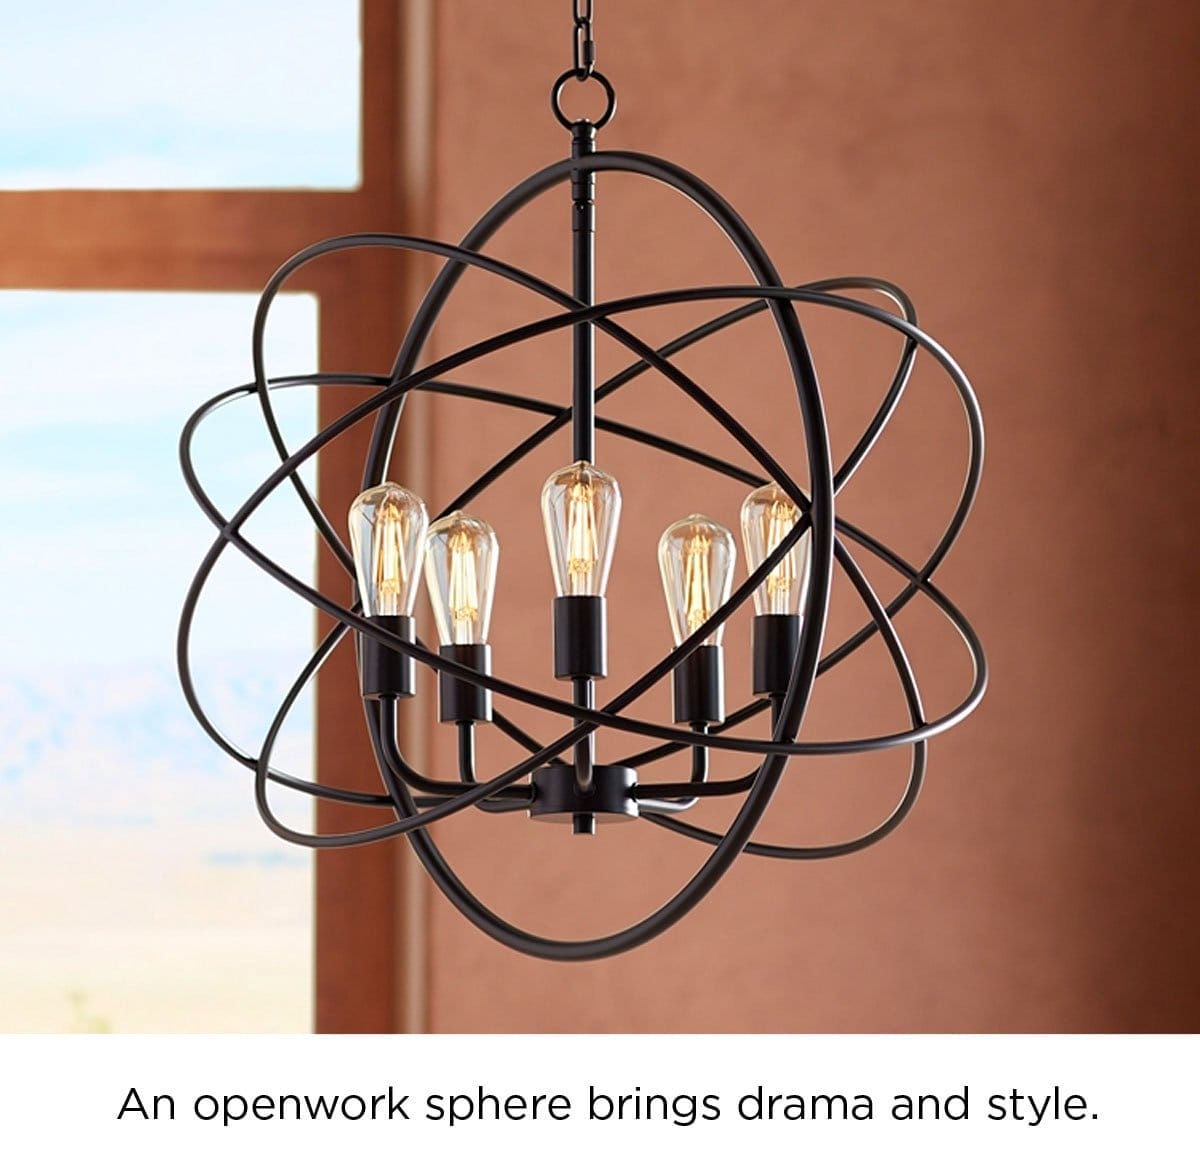 An openwork sphere brings drama and style.